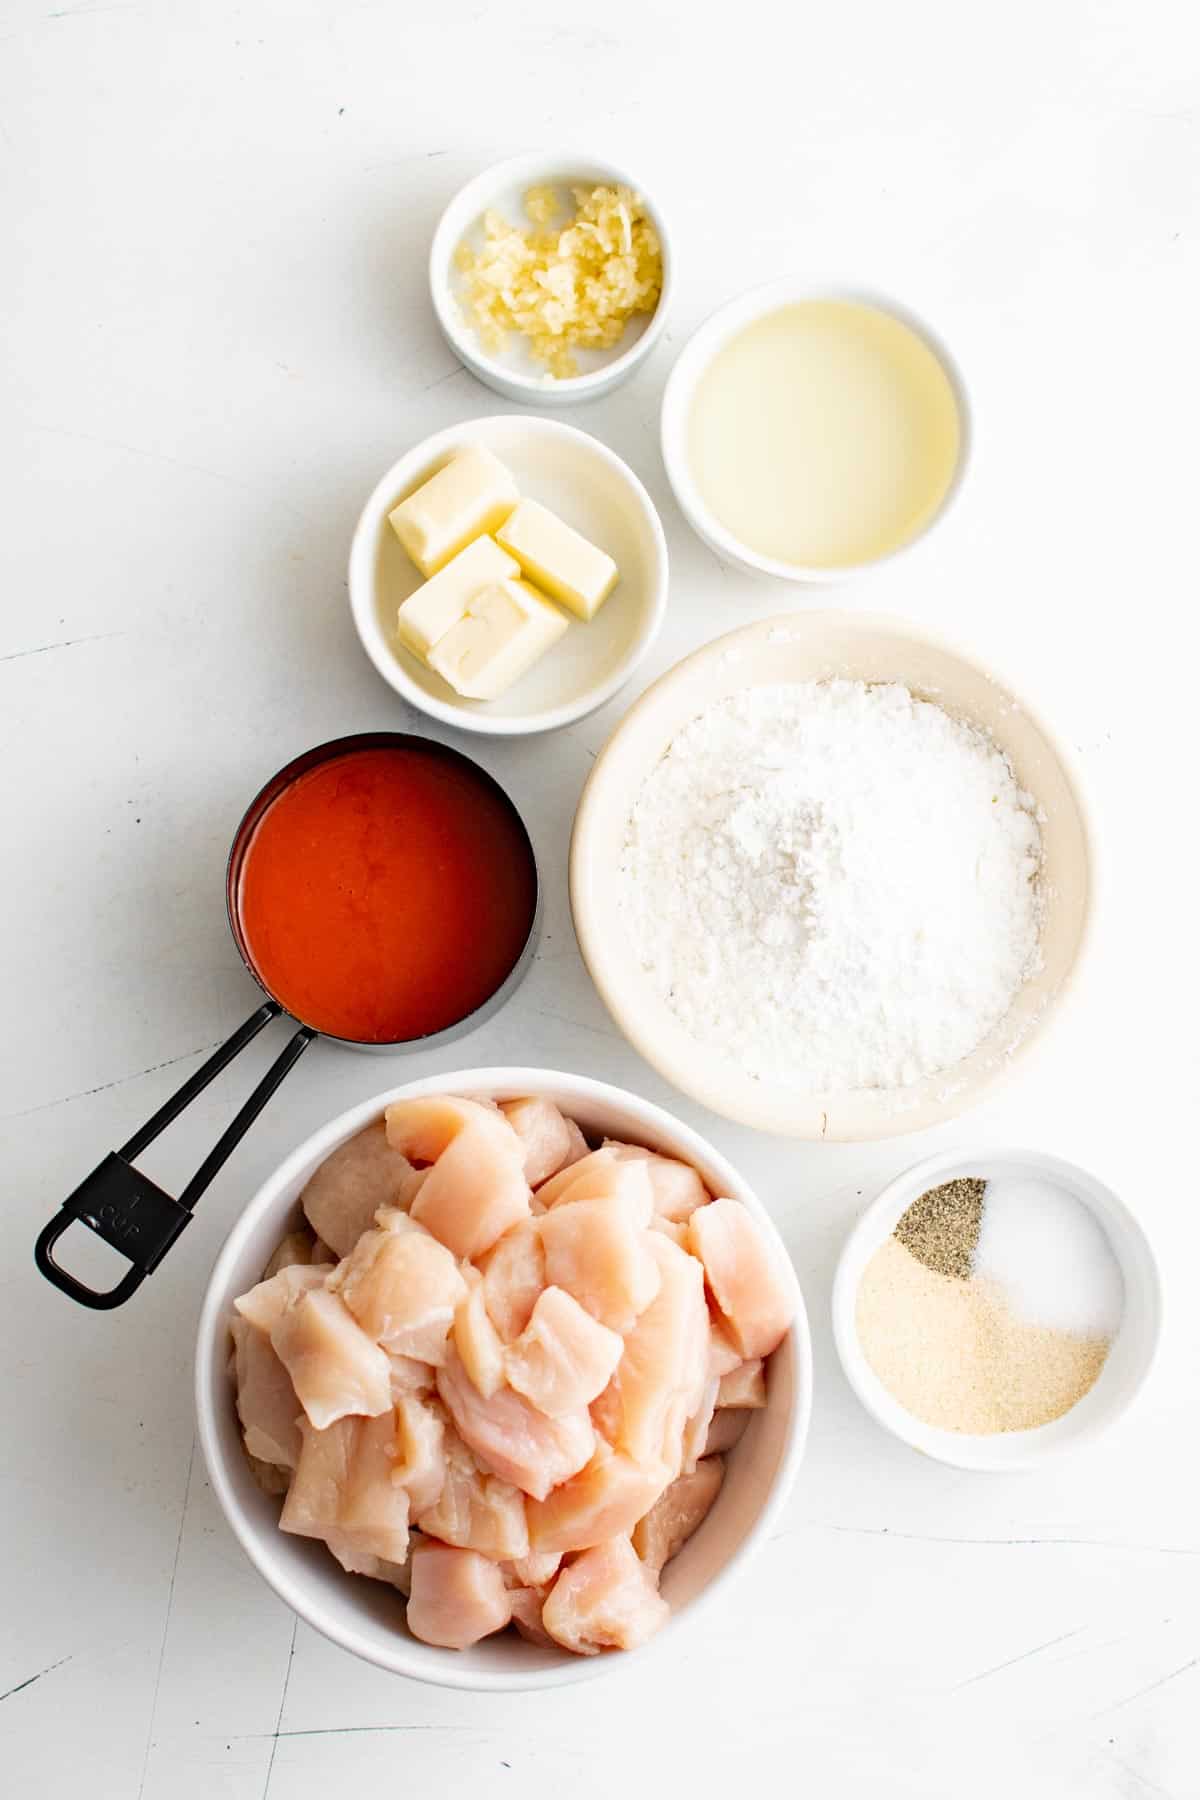 The ingredients for buffalo chicken bites.